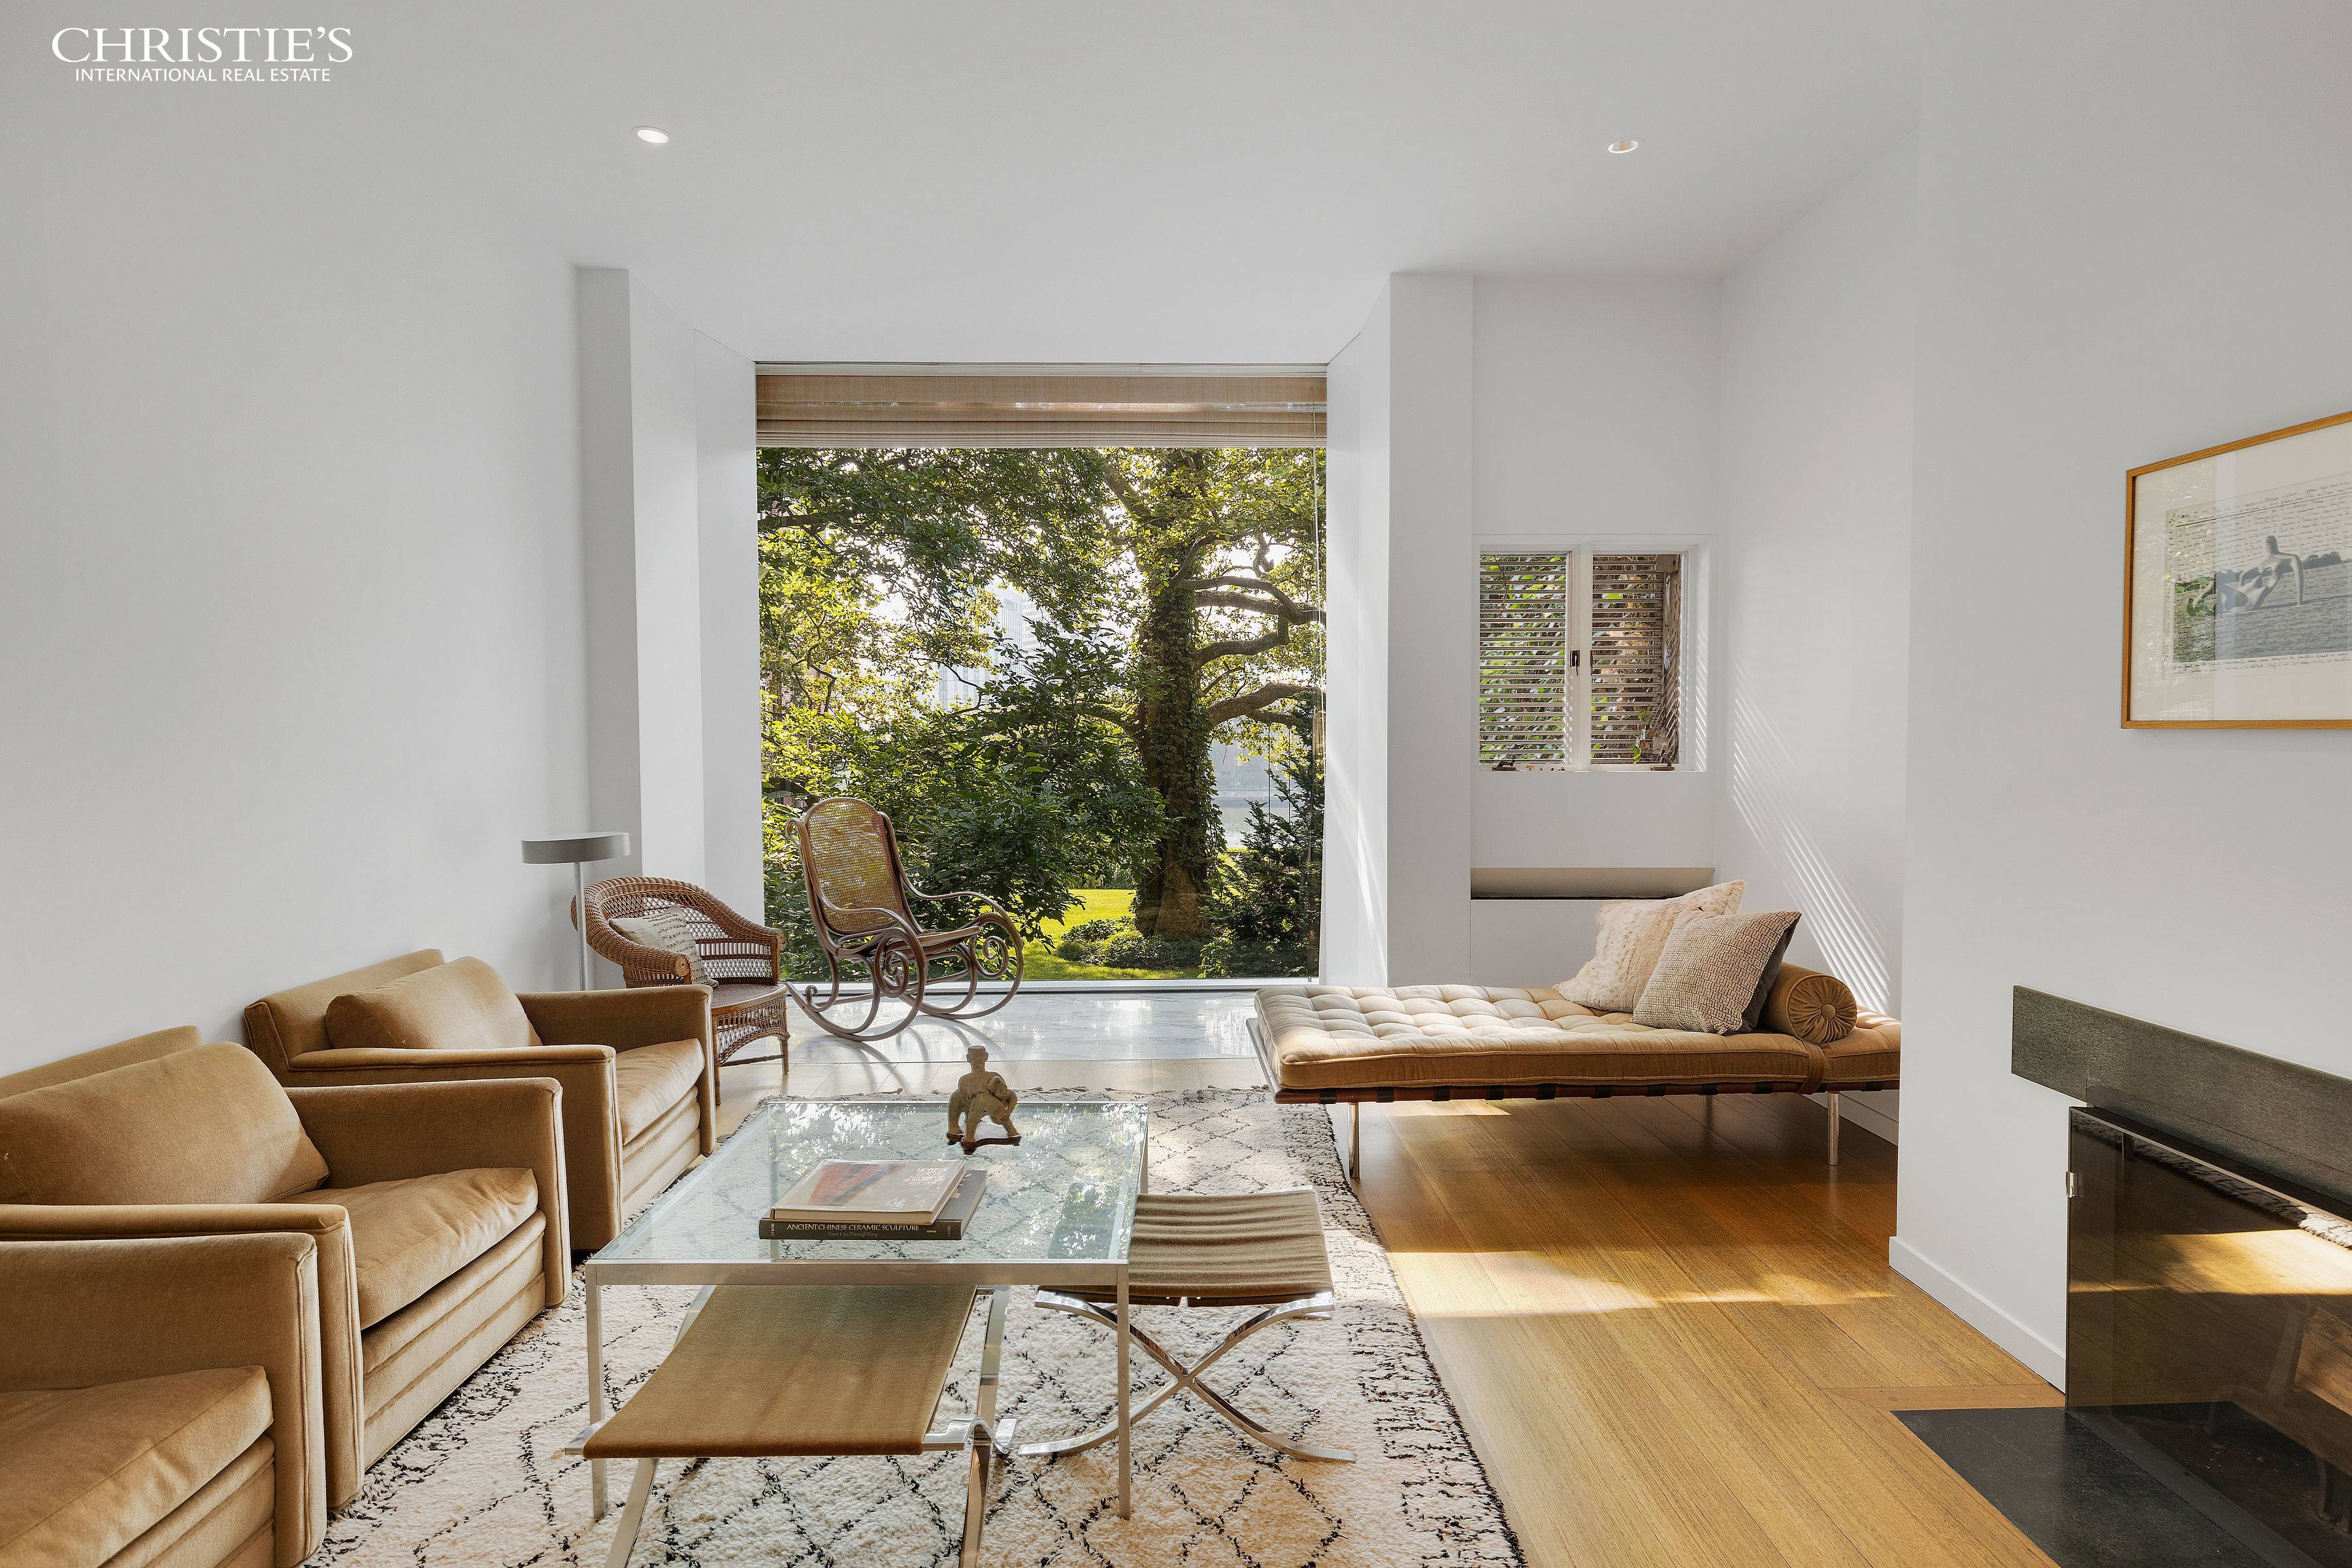 THE I. M. PEI RESIDENCE 11 SUTTON PLACE Perched above Manhattan's East River and located within the prestigious tree lined enclave of Sutton Place is this historic townhouse and home ...